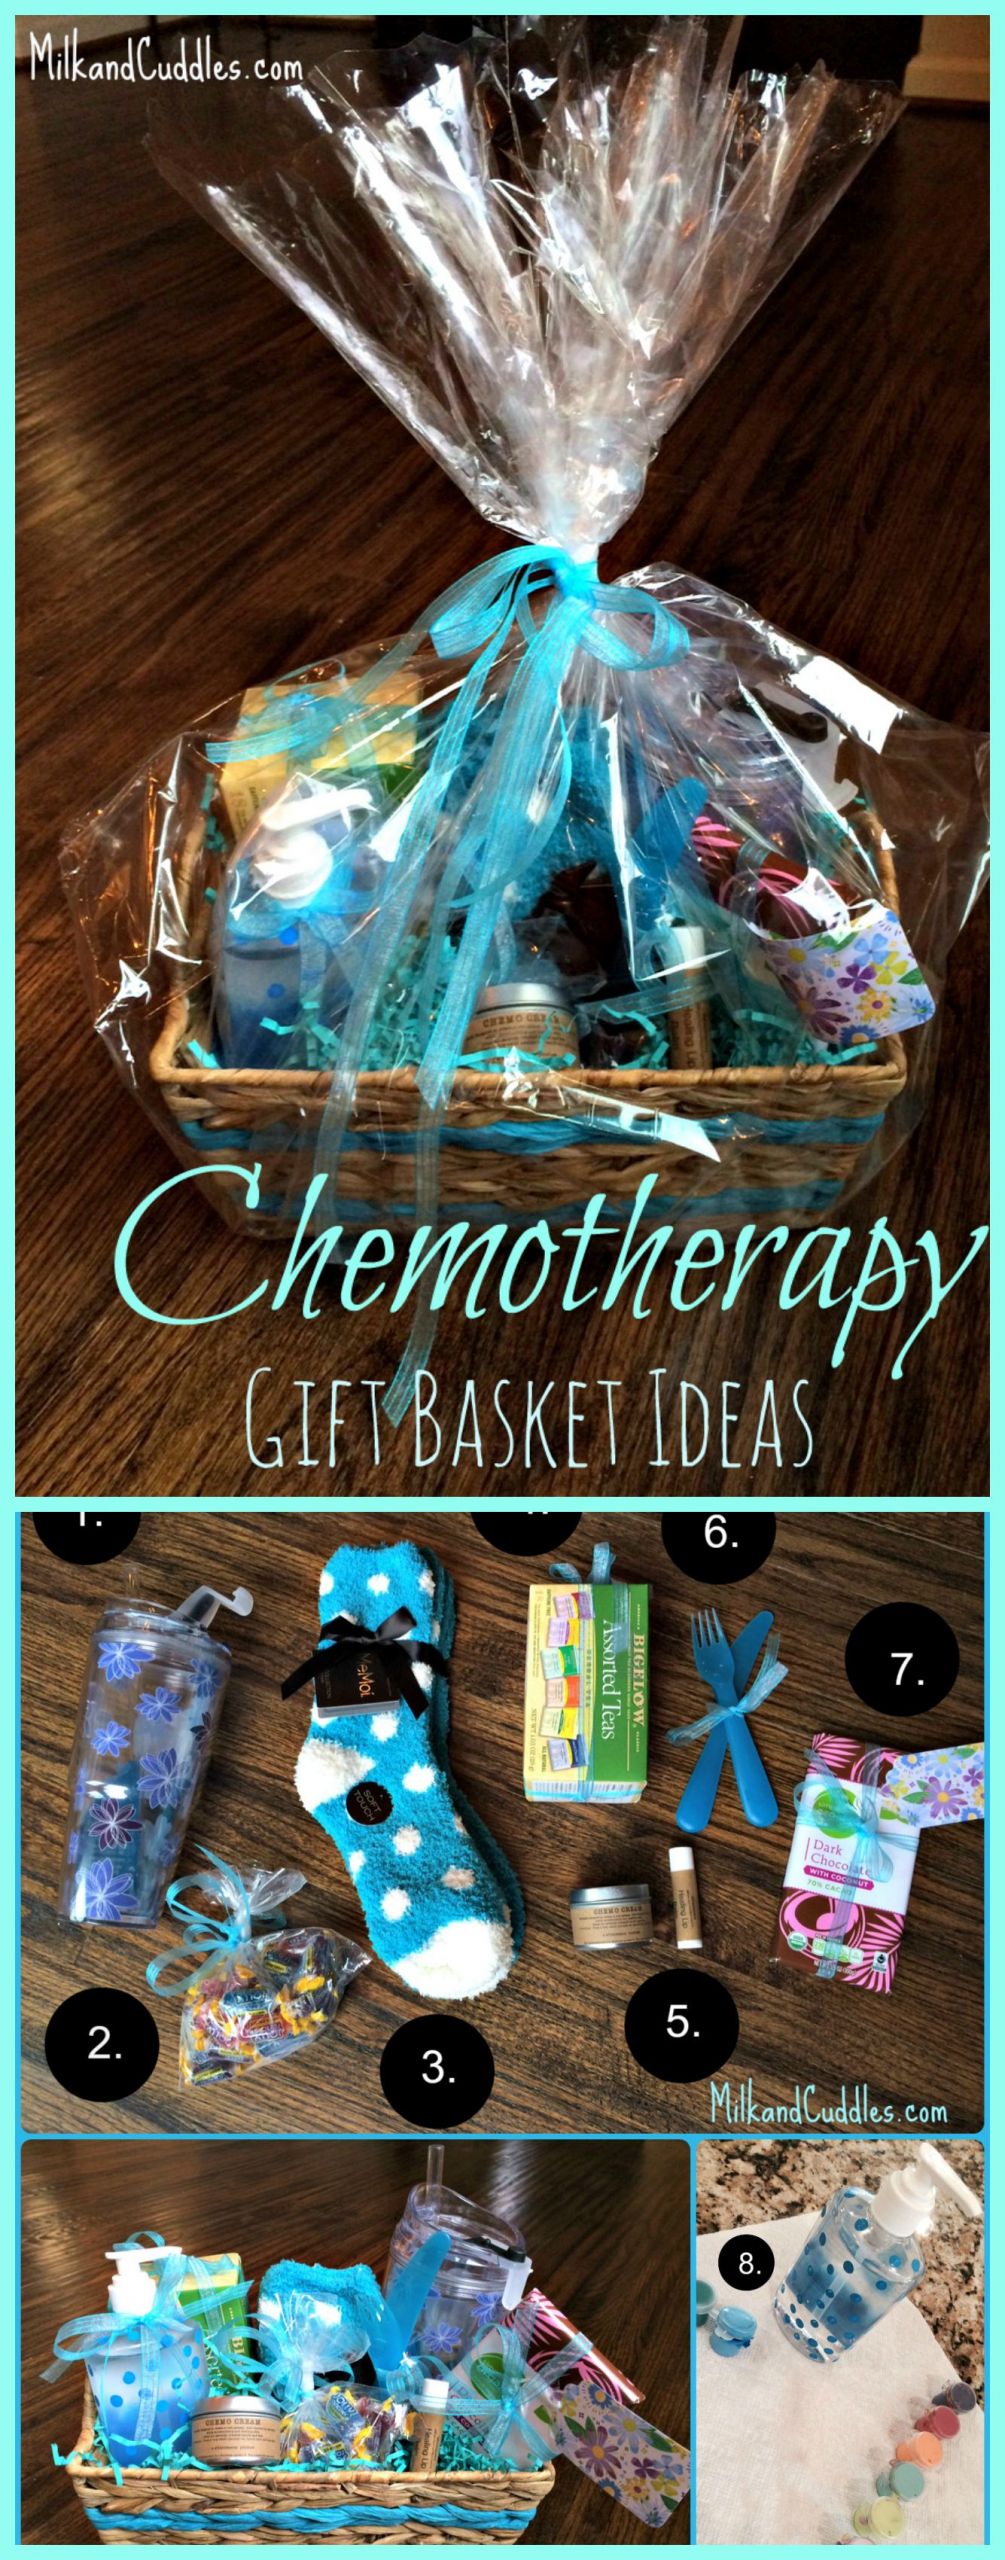 Chemotherapy Gift Ideas
 Gift Basket Ideas for someone going through Chemo